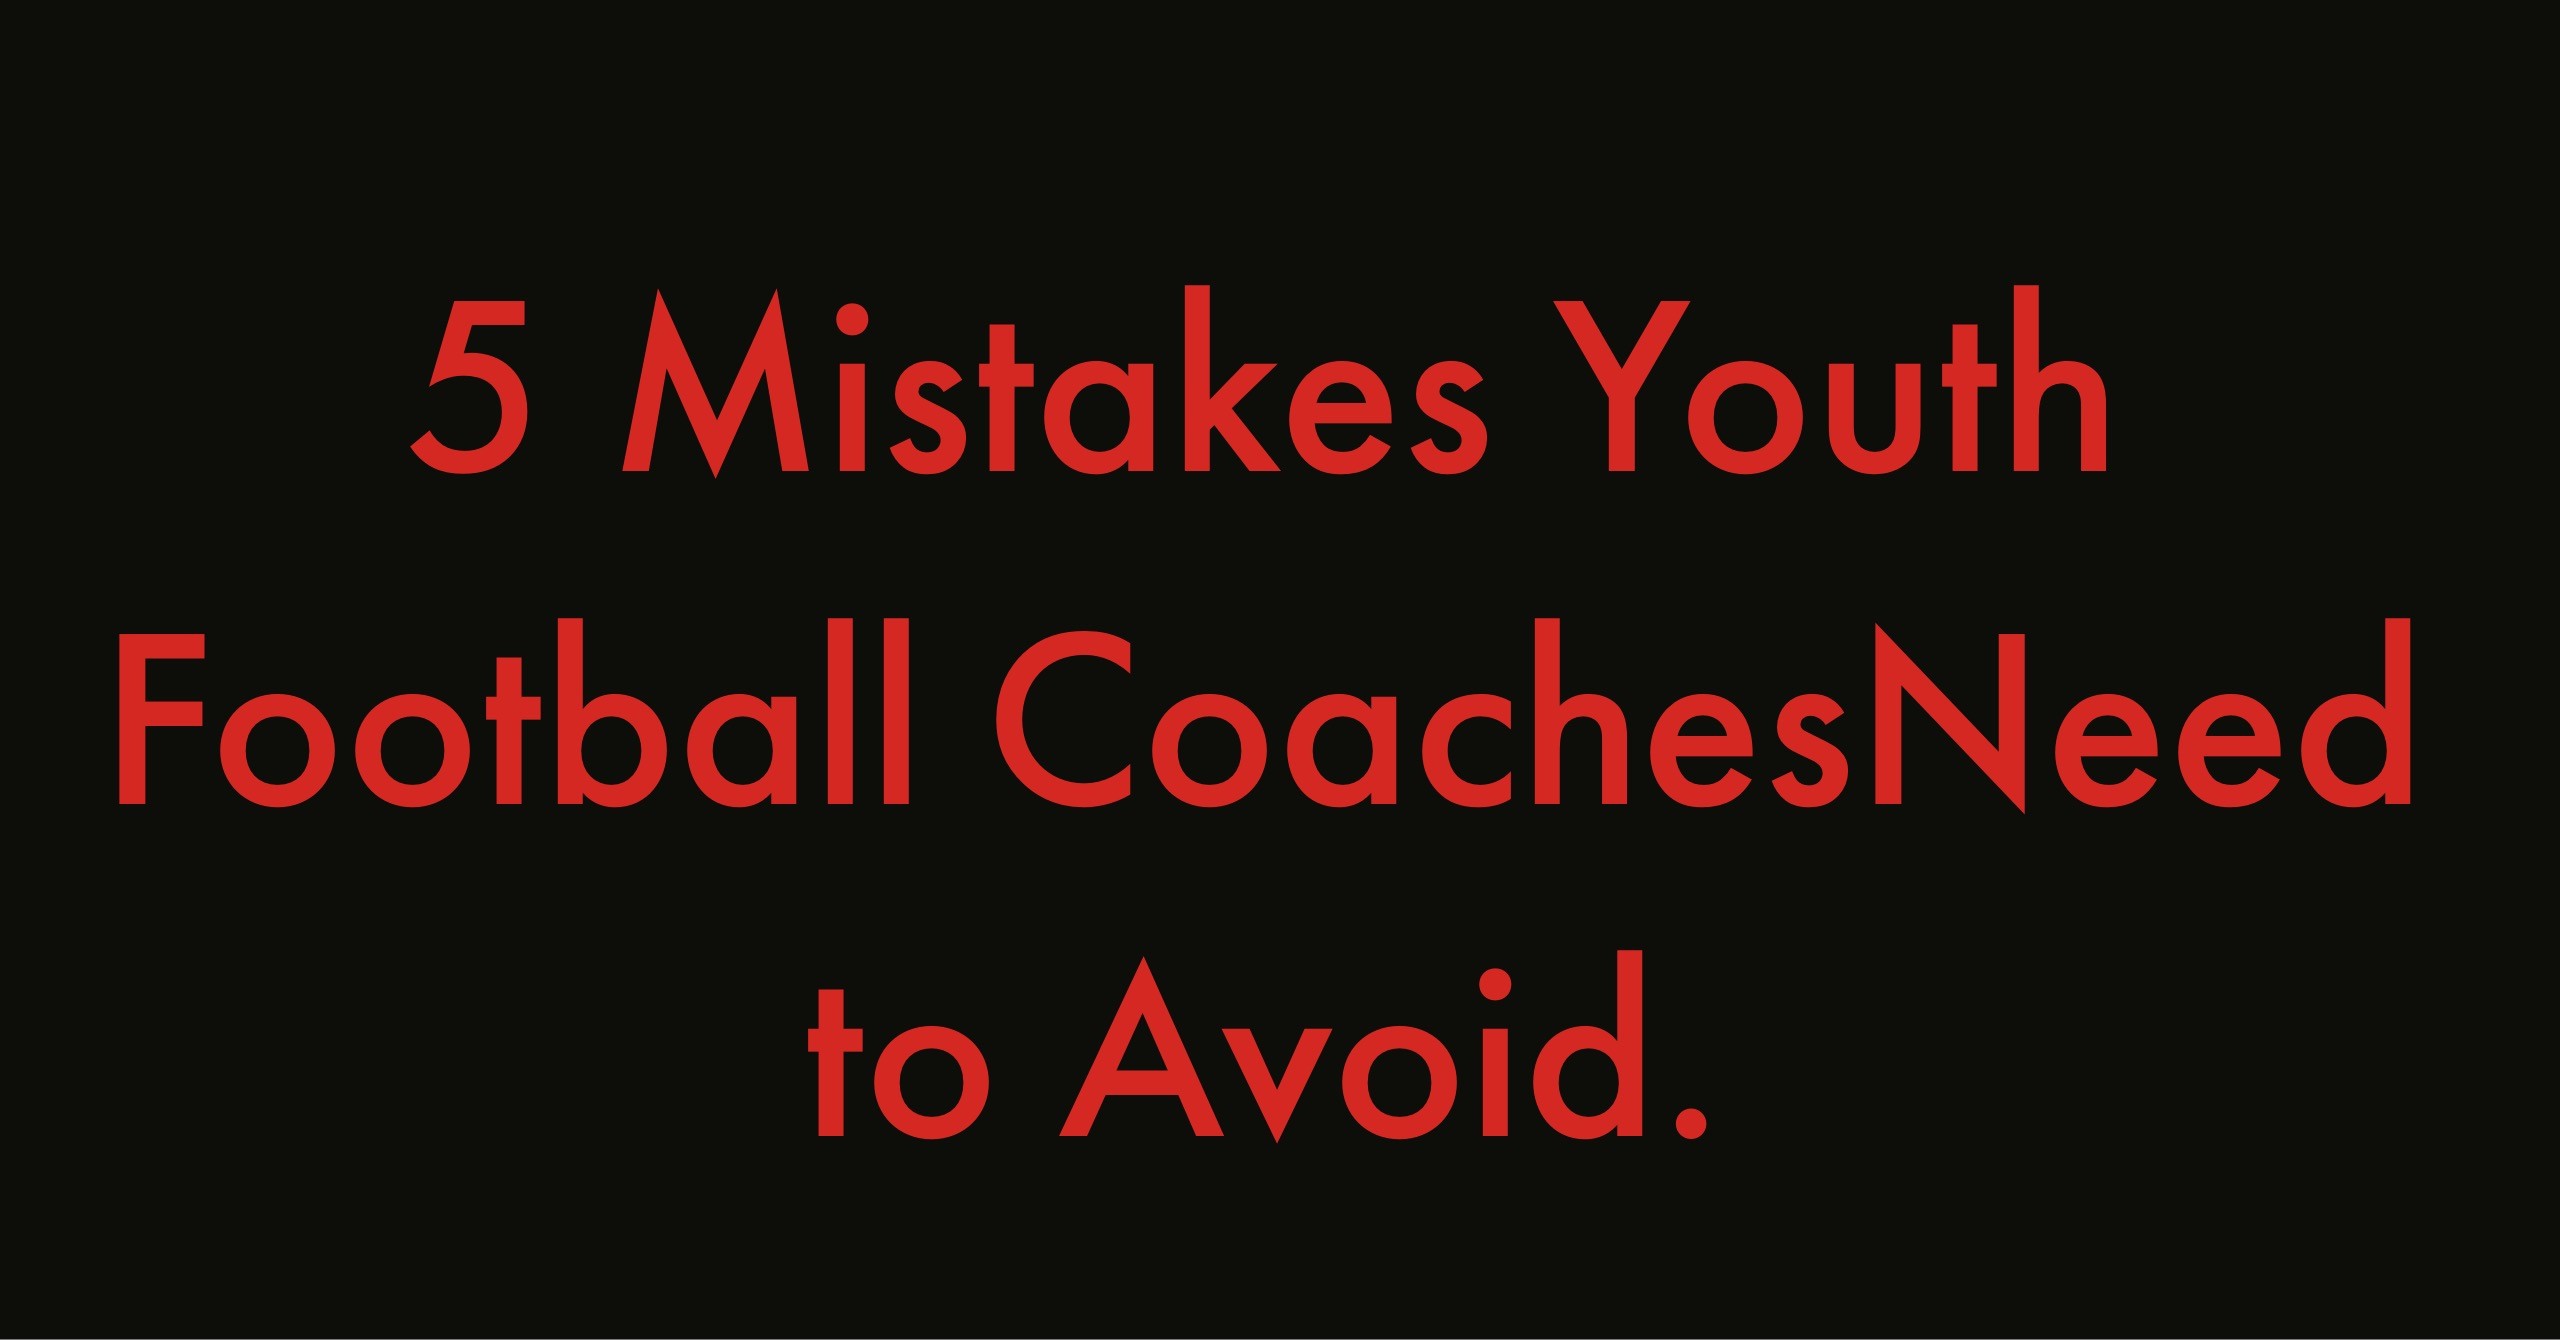 Five Mistakes For Youth Football Coaches To Avoid